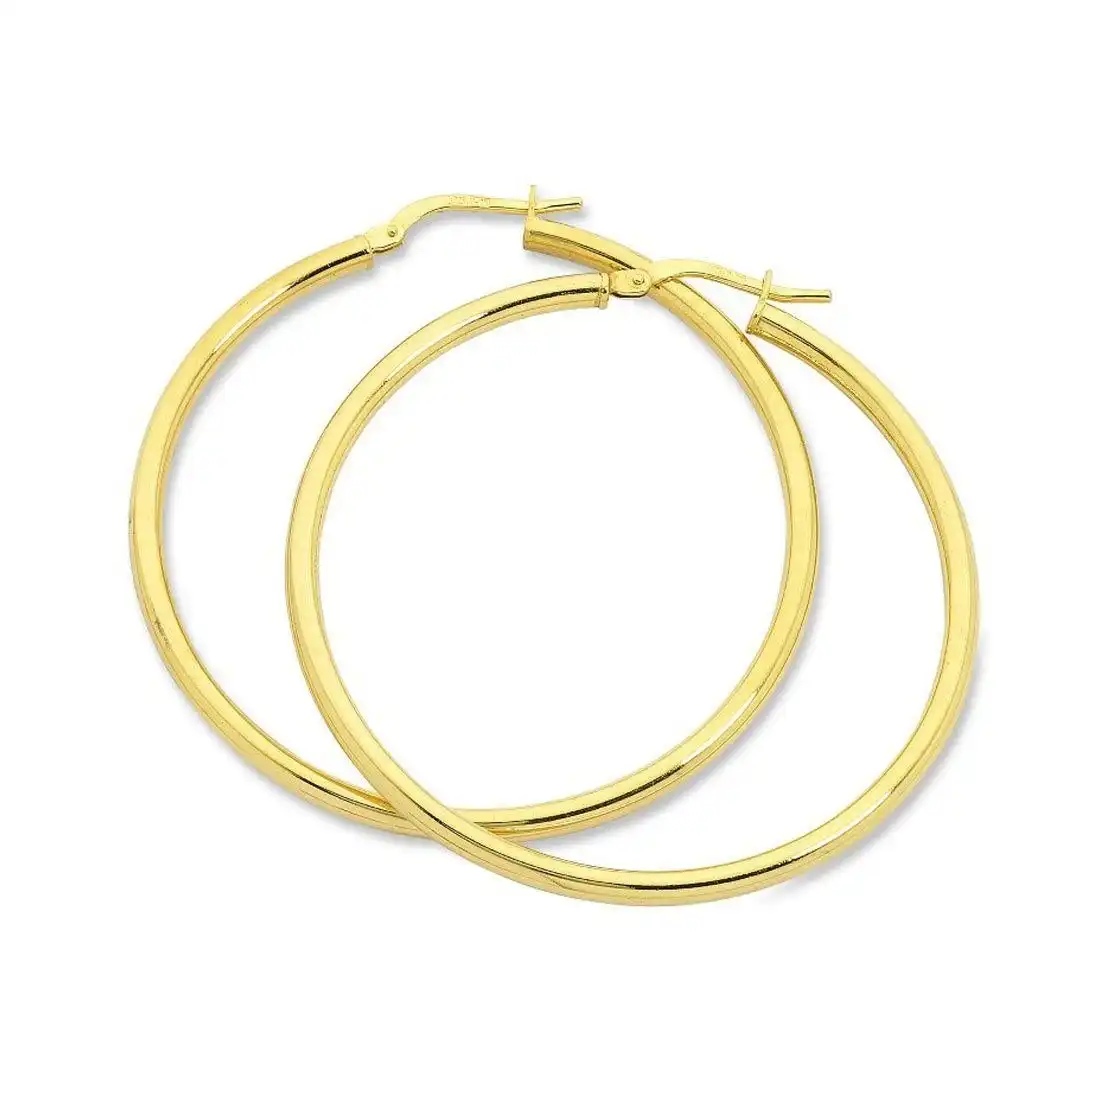 9ct Yellow Gold Silver Infused Plain Hoop Earrings 65mm